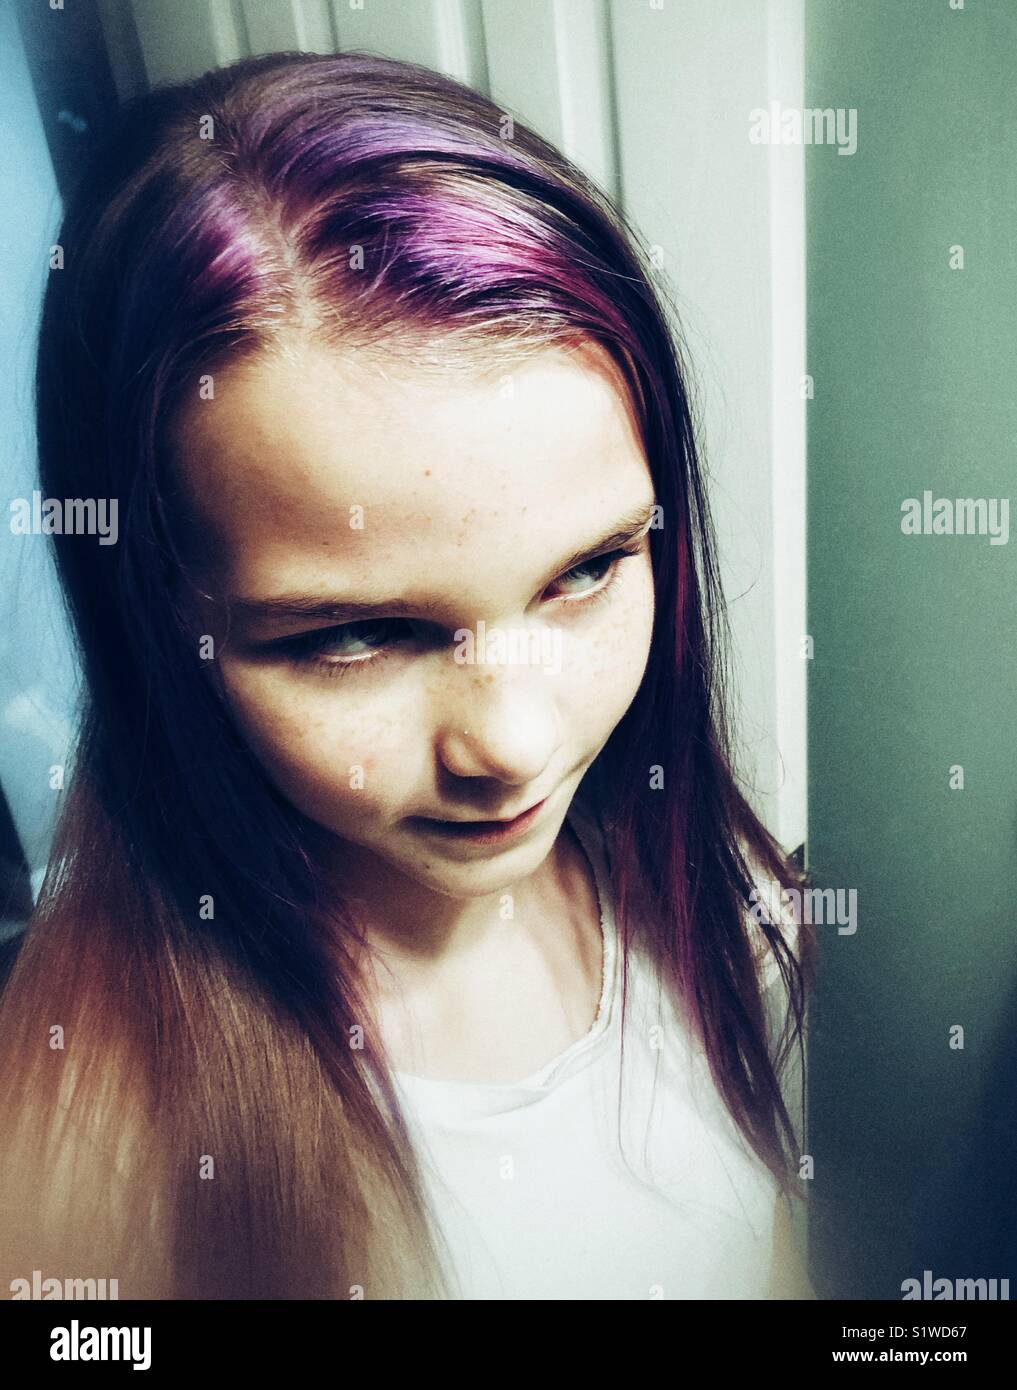 10 year old girl looking at her new purple hair streaks Stock Photo